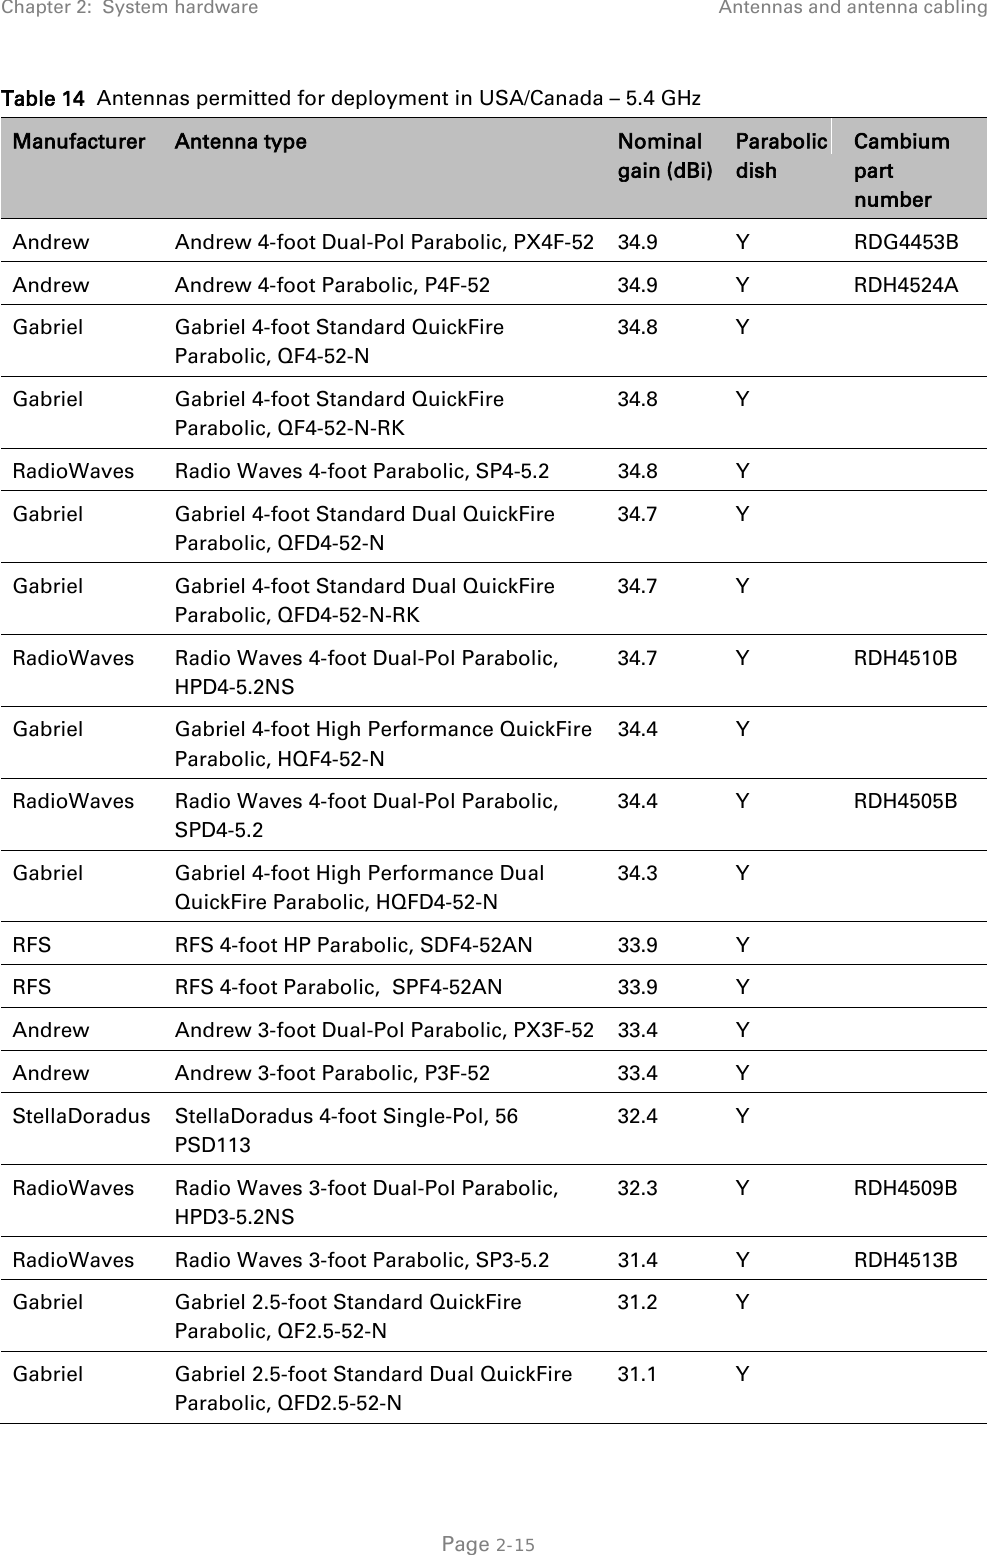 Chapter 2:  System hardware Antennas and antenna cabling  Table 14  Antennas permitted for deployment in USA/Canada – 5.4 GHz Manufacturer Antenna type Nominal gain (dBi) Parabolic dish Cambium part number Andrew Andrew 4-foot Dual-Pol Parabolic, PX4F-52   34.9  Y  RDG4453B Andrew Andrew 4-foot Parabolic, P4F-52   34.9  Y  RDH4524A Gabriel Gabriel 4-foot Standard QuickFire Parabolic, QF4-52-N   34.8  Y   Gabriel Gabriel 4-foot Standard QuickFire Parabolic, QF4-52-N-RK   34.8  Y   RadioWaves Radio Waves 4-foot Parabolic, SP4-5.2  34.8  Y   Gabriel Gabriel 4-foot Standard Dual QuickFire Parabolic, QFD4-52-N   34.7  Y   Gabriel Gabriel 4-foot Standard Dual QuickFire Parabolic, QFD4-52-N-RK   34.7  Y   RadioWaves Radio Waves 4-foot Dual-Pol Parabolic, HPD4-5.2NS 34.7  Y  RDH4510B Gabriel Gabriel 4-foot High Performance QuickFire Parabolic, HQF4-52-N   34.4  Y   RadioWaves Radio Waves 4-foot Dual-Pol Parabolic, SPD4-5.2 34.4  Y  RDH4505B Gabriel Gabriel 4-foot High Performance Dual QuickFire Parabolic, HQFD4-52-N   34.3  Y   RFS           RFS 4-foot HP Parabolic, SDF4-52AN 33.9  Y   RFS           RFS 4-foot Parabolic,  SPF4-52AN 33.9  Y   Andrew Andrew 3-foot Dual-Pol Parabolic, PX3F-52  33.4  Y   Andrew Andrew 3-foot Parabolic, P3F-52  33.4  Y   StellaDoradus StellaDoradus 4-foot Single-Pol, 56 PSD113 32.4  Y   RadioWaves Radio Waves 3-foot Dual-Pol Parabolic, HPD3-5.2NS 32.3  Y  RDH4509B RadioWaves Radio Waves 3-foot Parabolic, SP3-5.2 31.4  Y  RDH4513B Gabriel Gabriel 2.5-foot Standard QuickFire Parabolic, QF2.5-52-N   31.2  Y   Gabriel Gabriel 2.5-foot Standard Dual QuickFire Parabolic, QFD2.5-52-N   31.1  Y    Page 2-15 